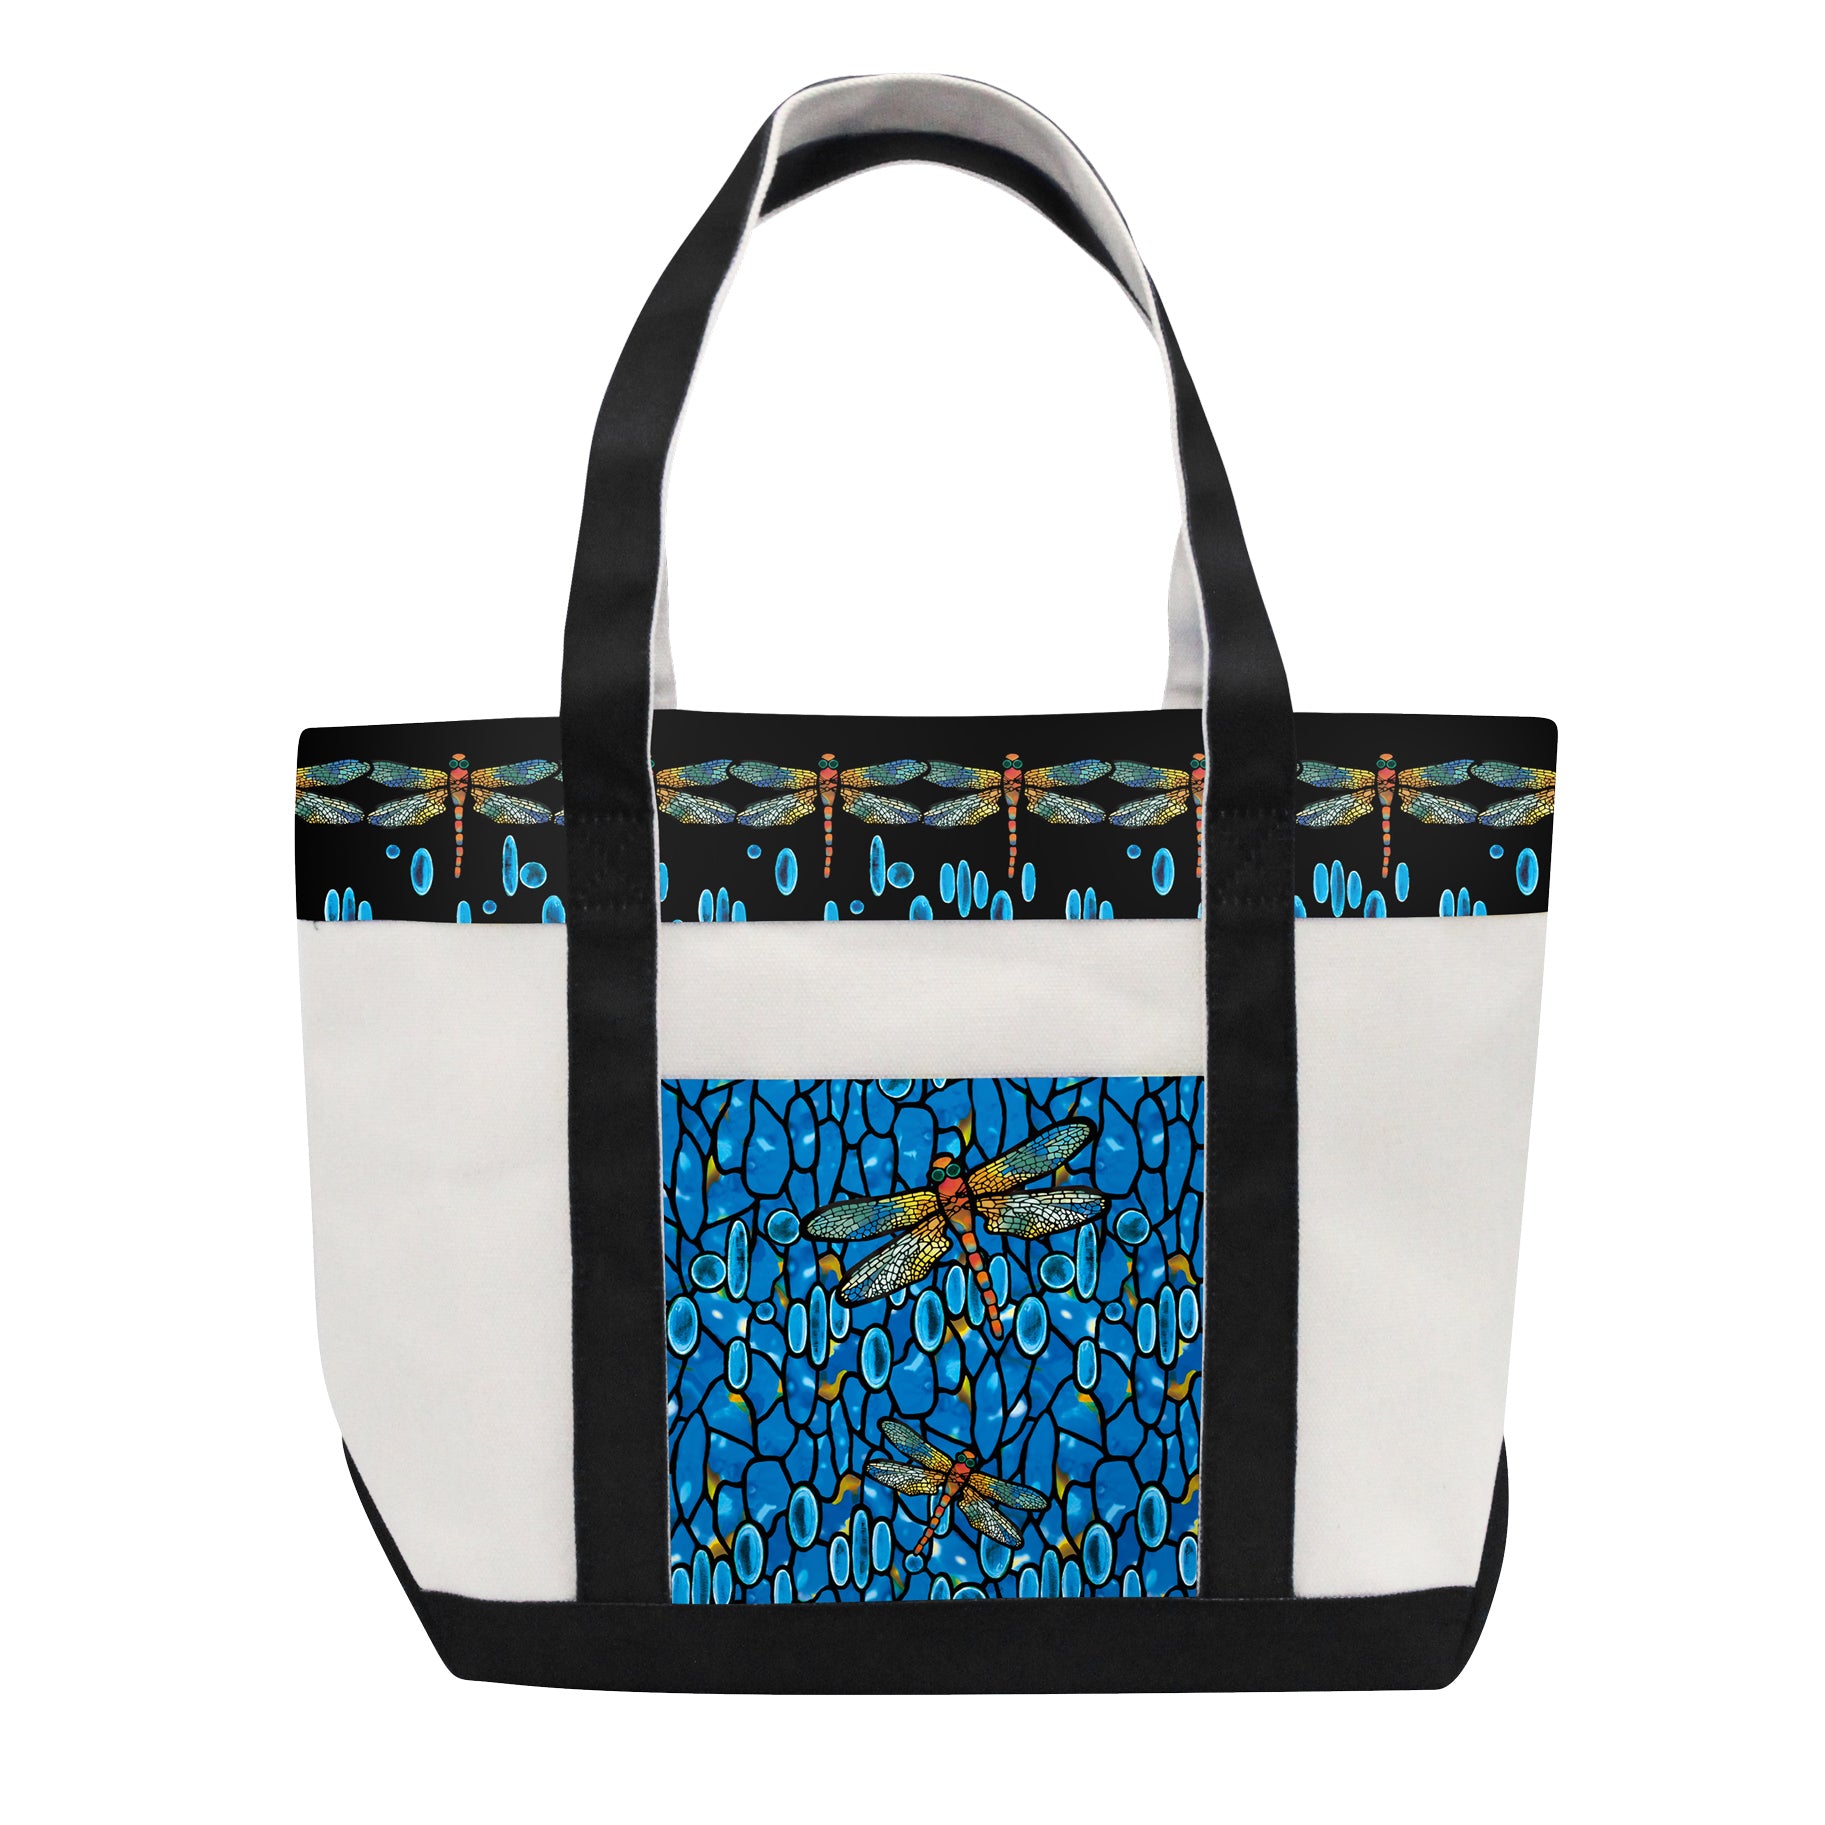 Tiffany's Dragonfly Large Shoulder Strap Canvas Boat Tote